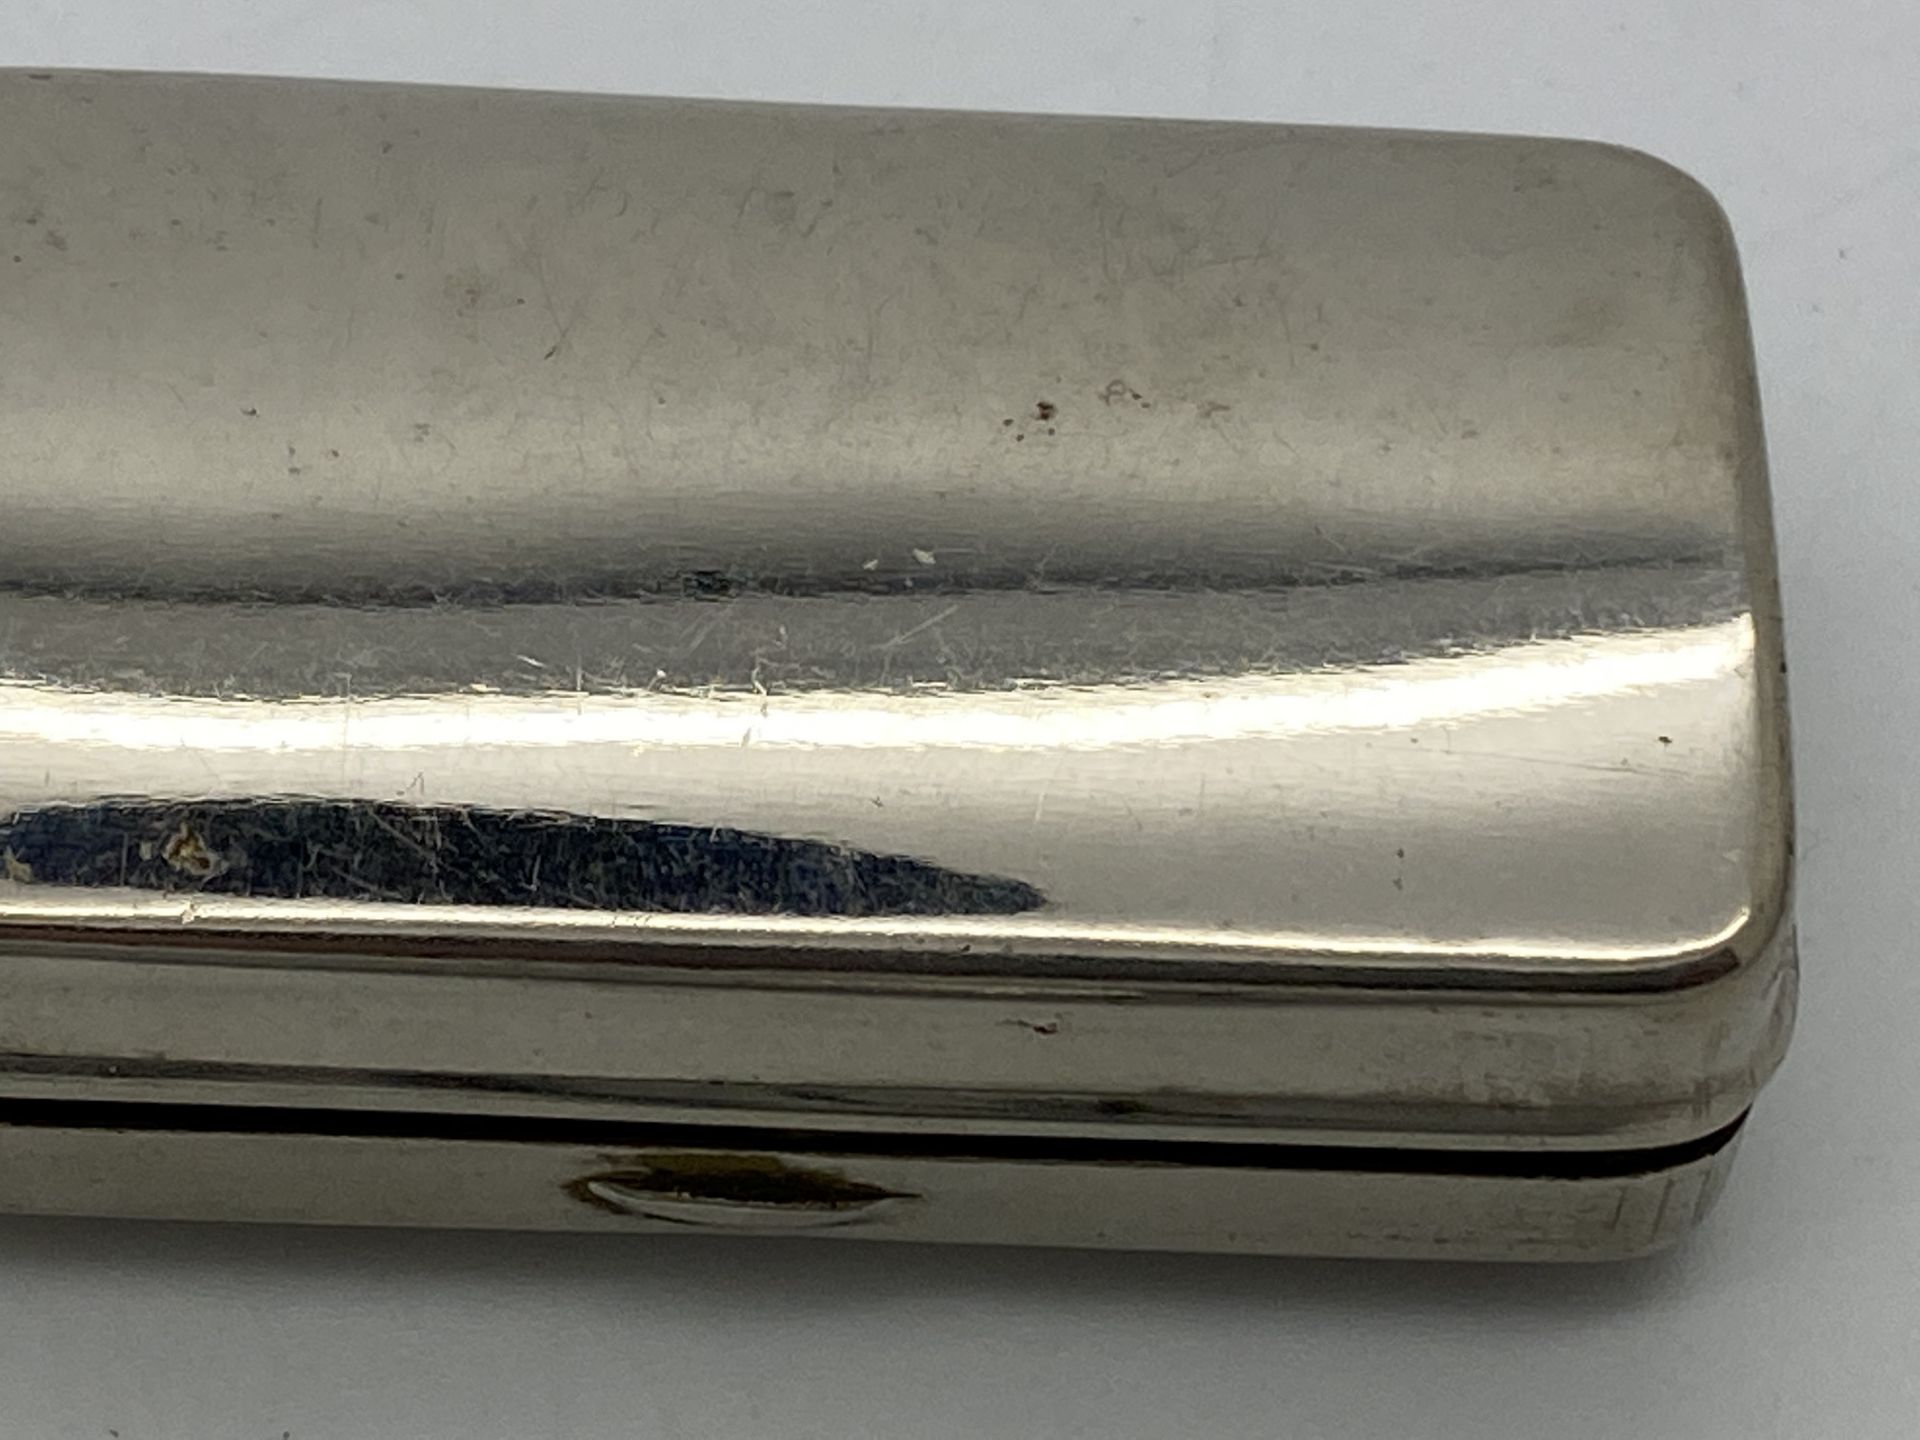 VINTAGE METAL CIGARETTE CASE 1 x OTHER METAL SNUFF BOX - Image 8 of 8